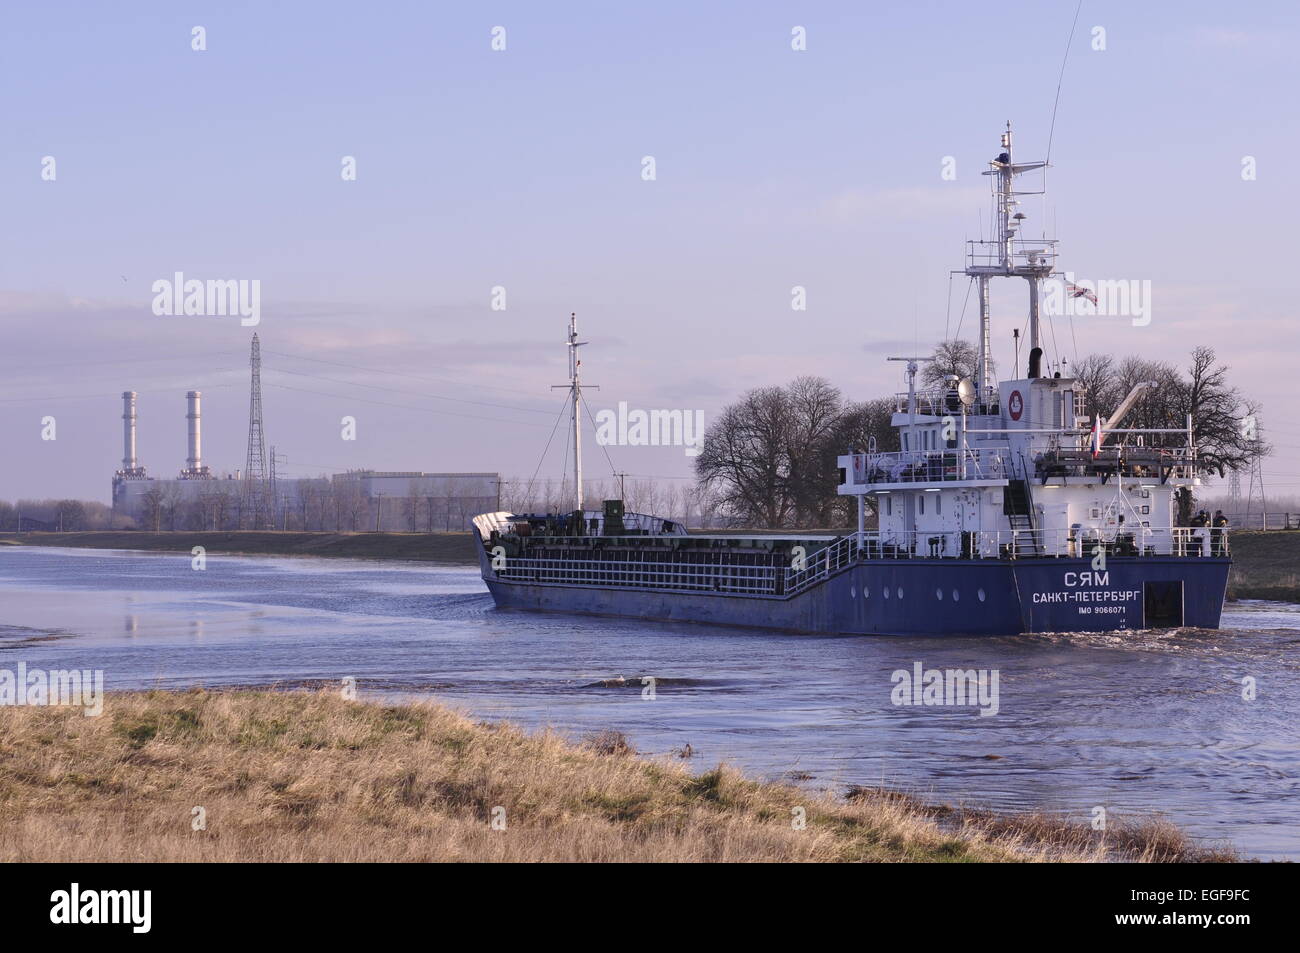 The Russian registered cargo ship Syam moving seawards down the River Nene, Lincolnshire from the port of Wisbech UK Stock Photo